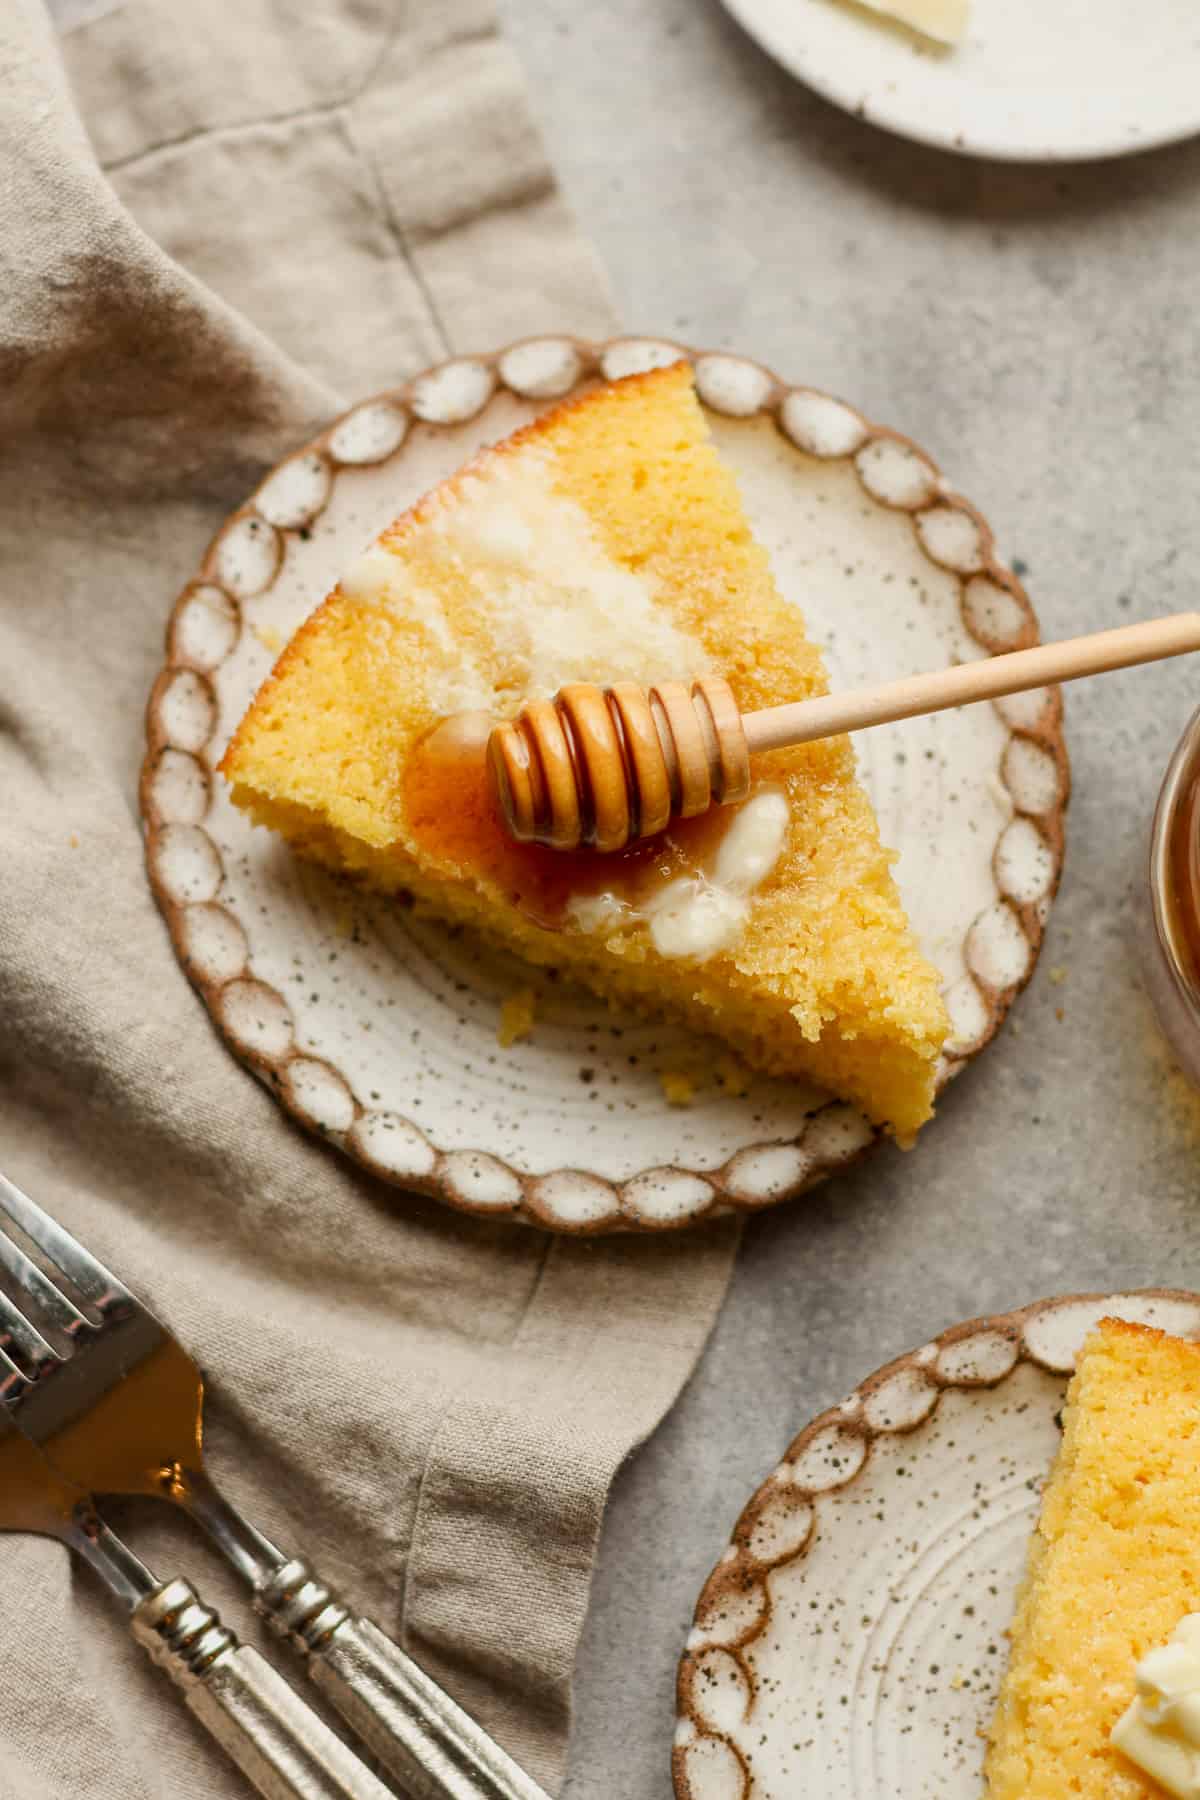 A small plate of a wedge of sweet cornbread with butter and a honey tool.